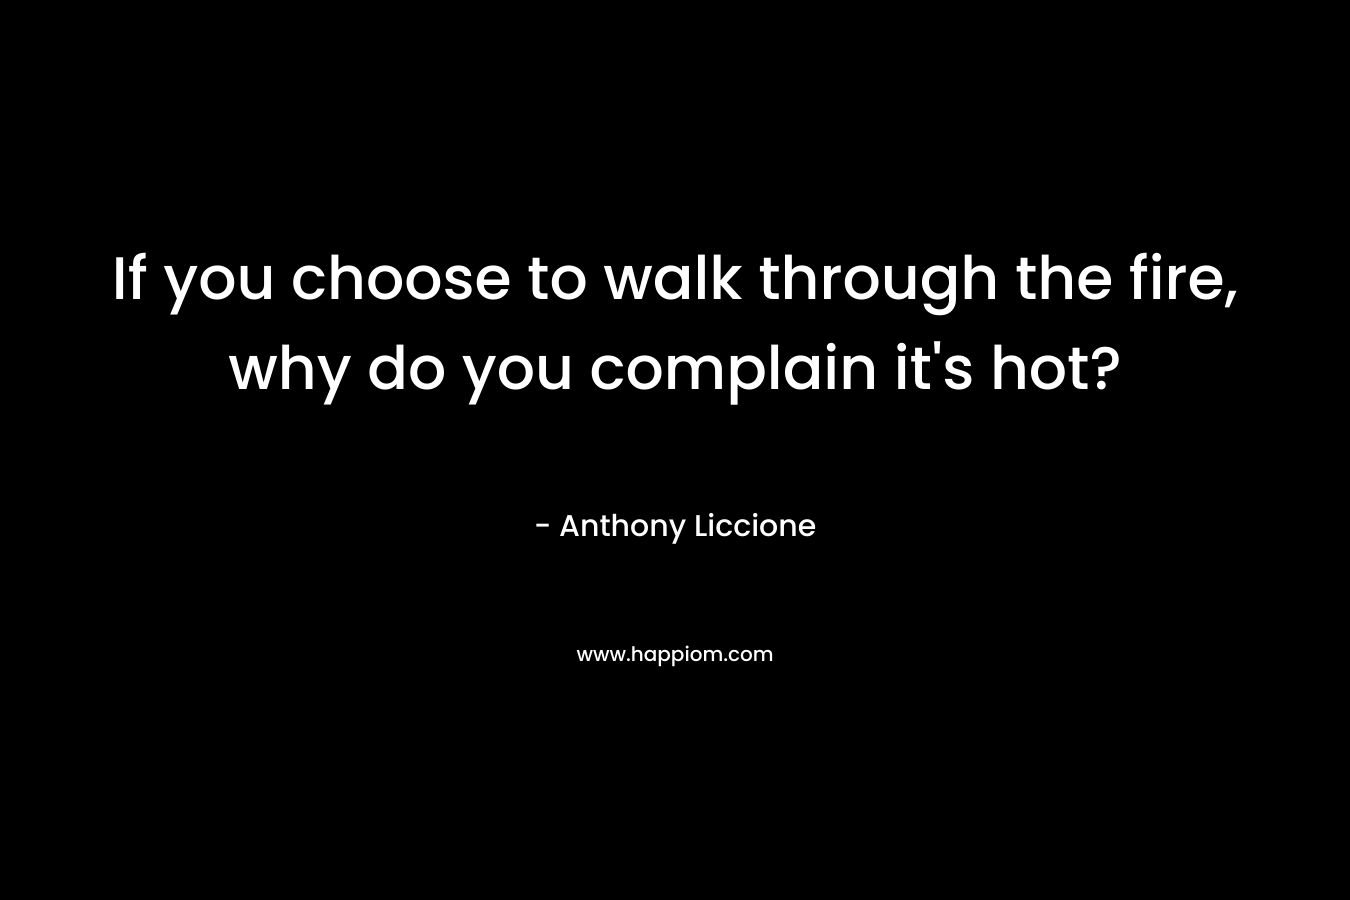 If you choose to walk through the fire, why do you complain it's hot?